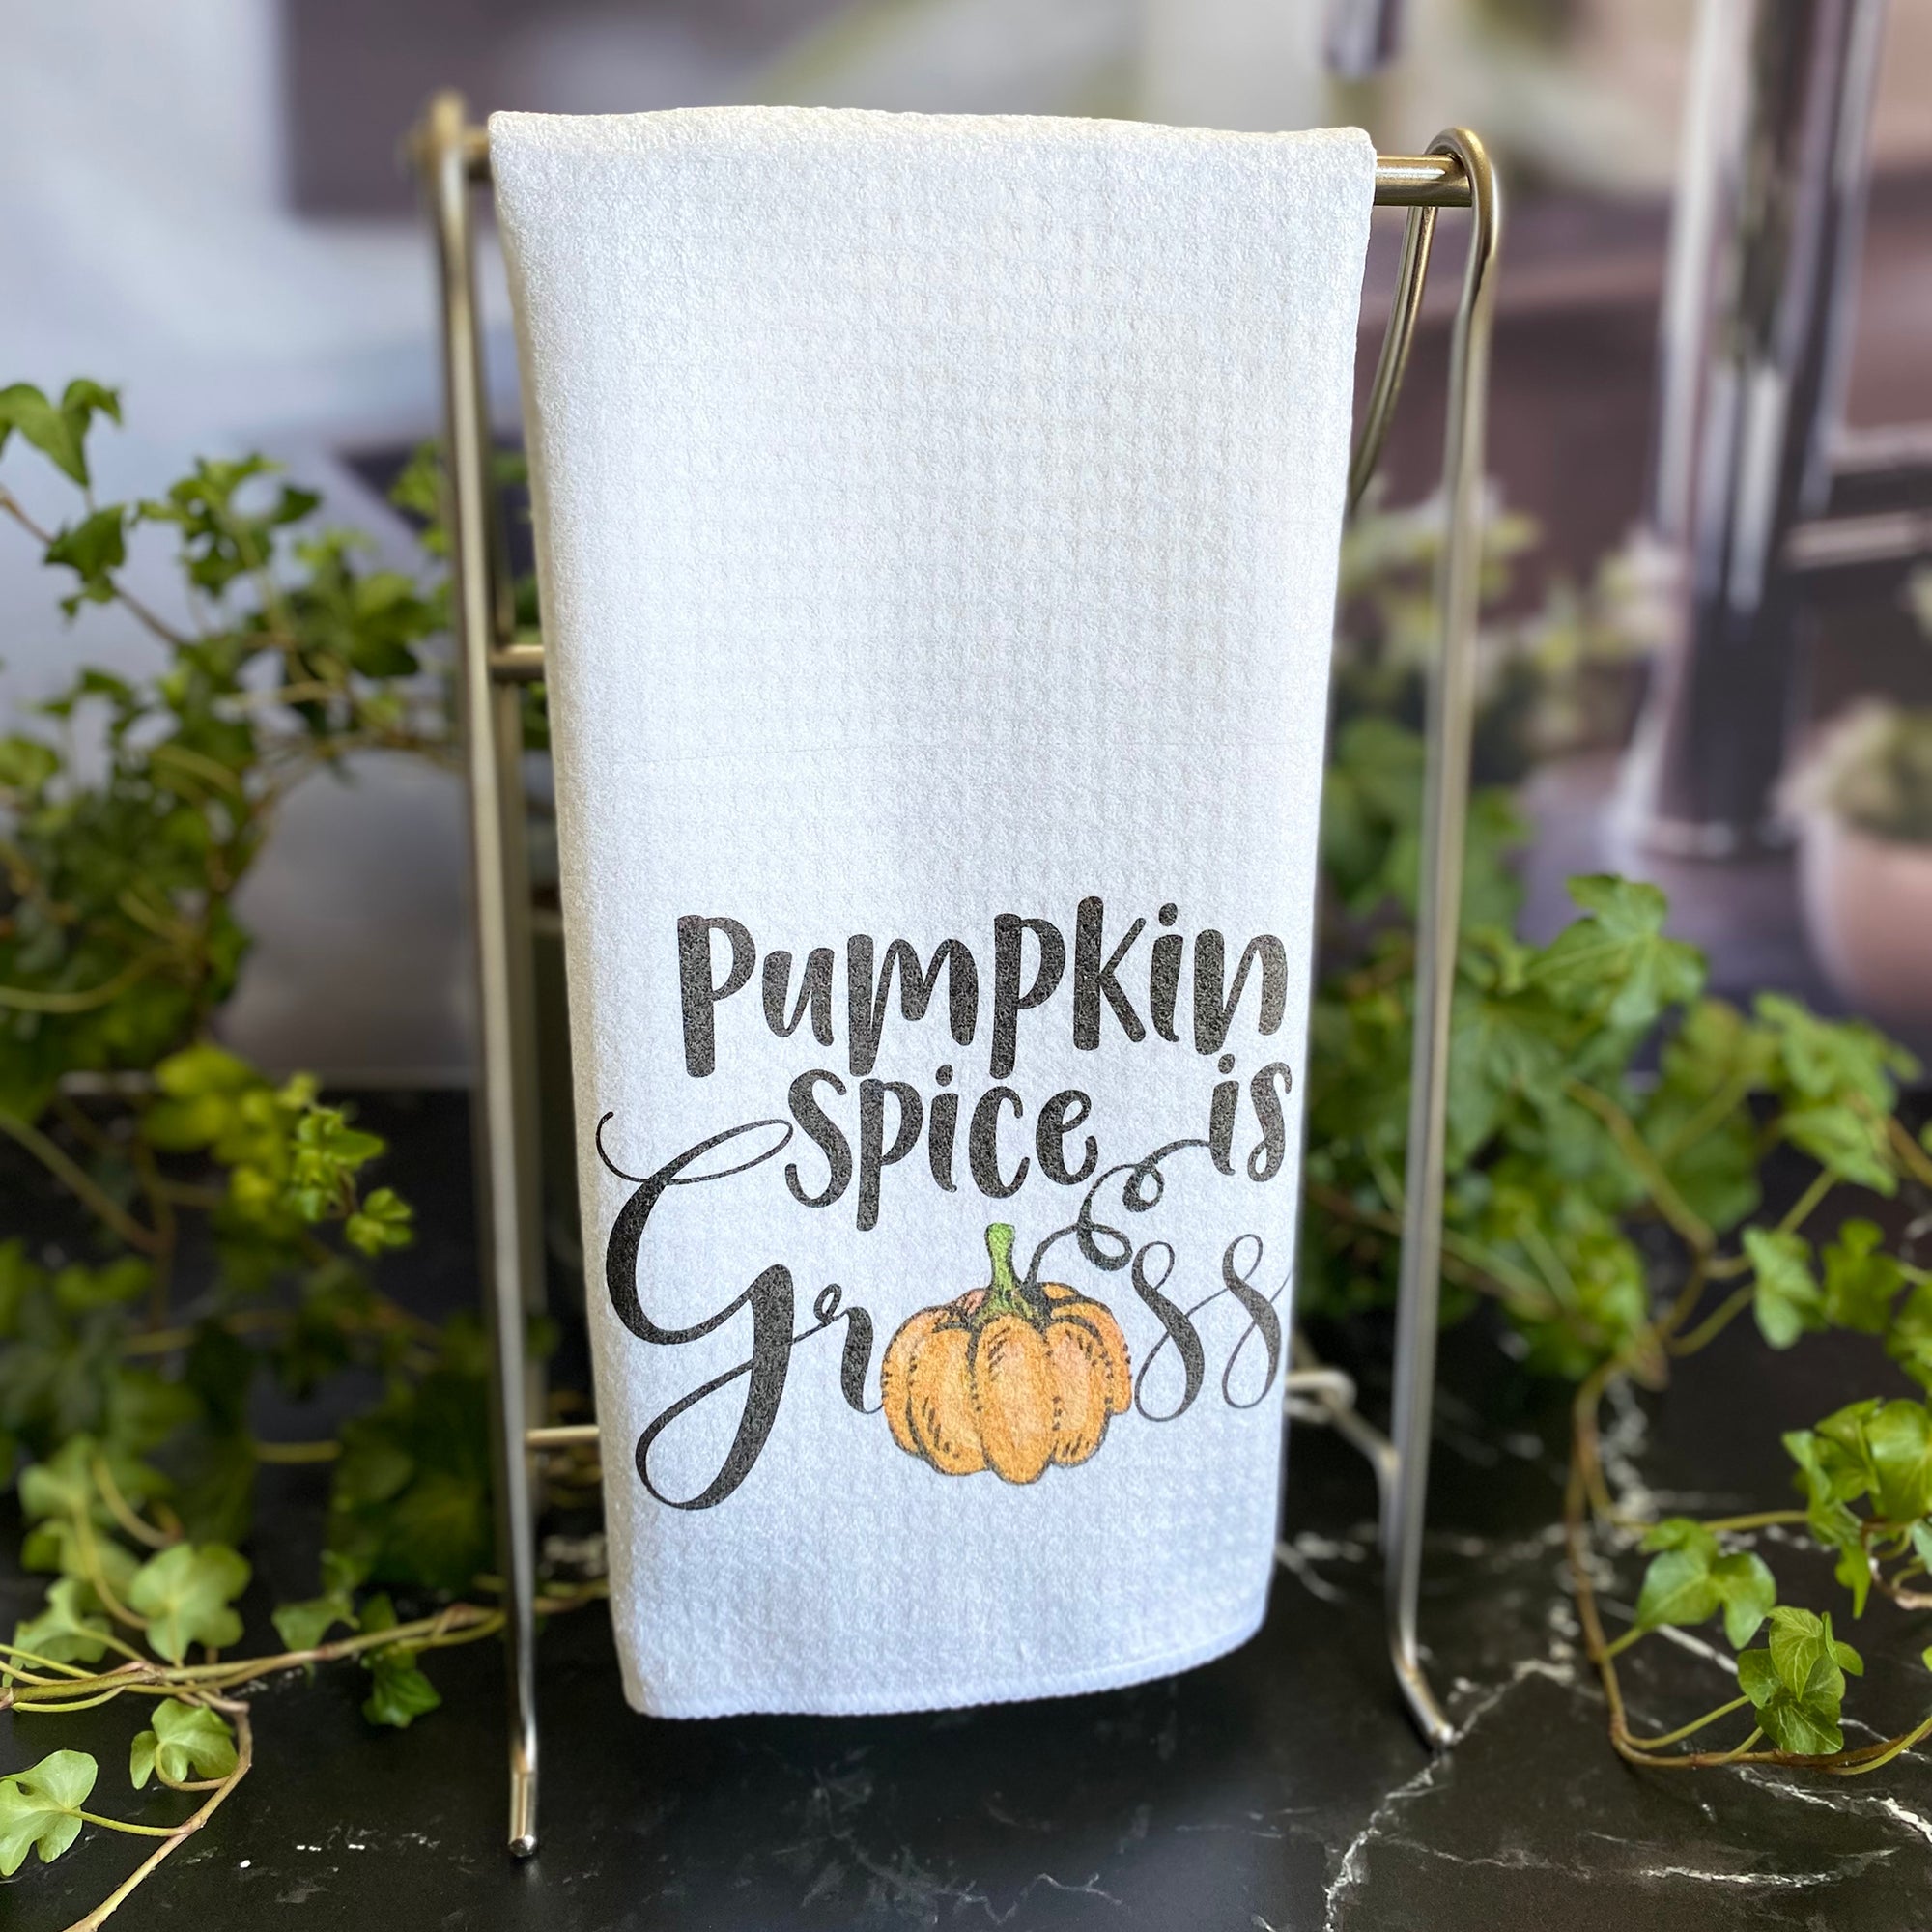 White waffle weave dishtowel with the words, "Pumpkin spice is gross" with a pumpkin instead of the letter 'o'.